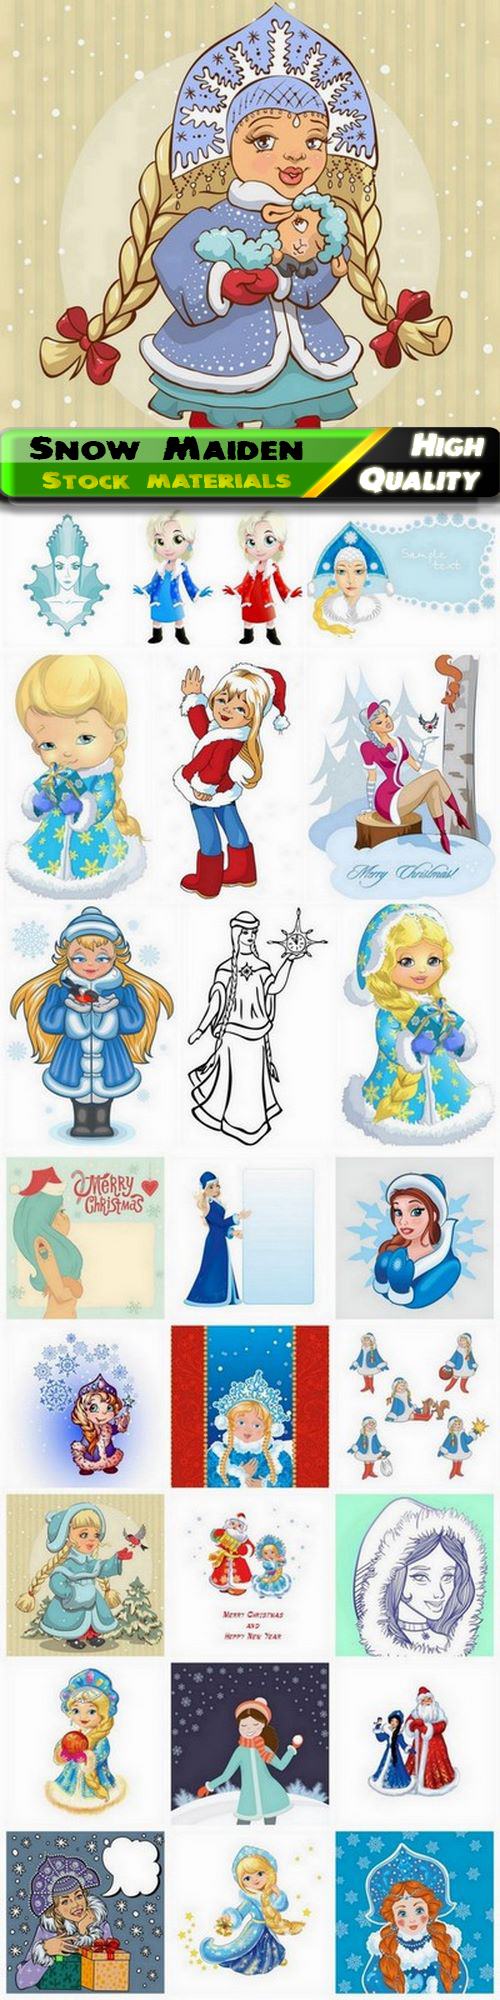 Snow Maiden and Santa Claus for Merry Christmas card - 25 Eps